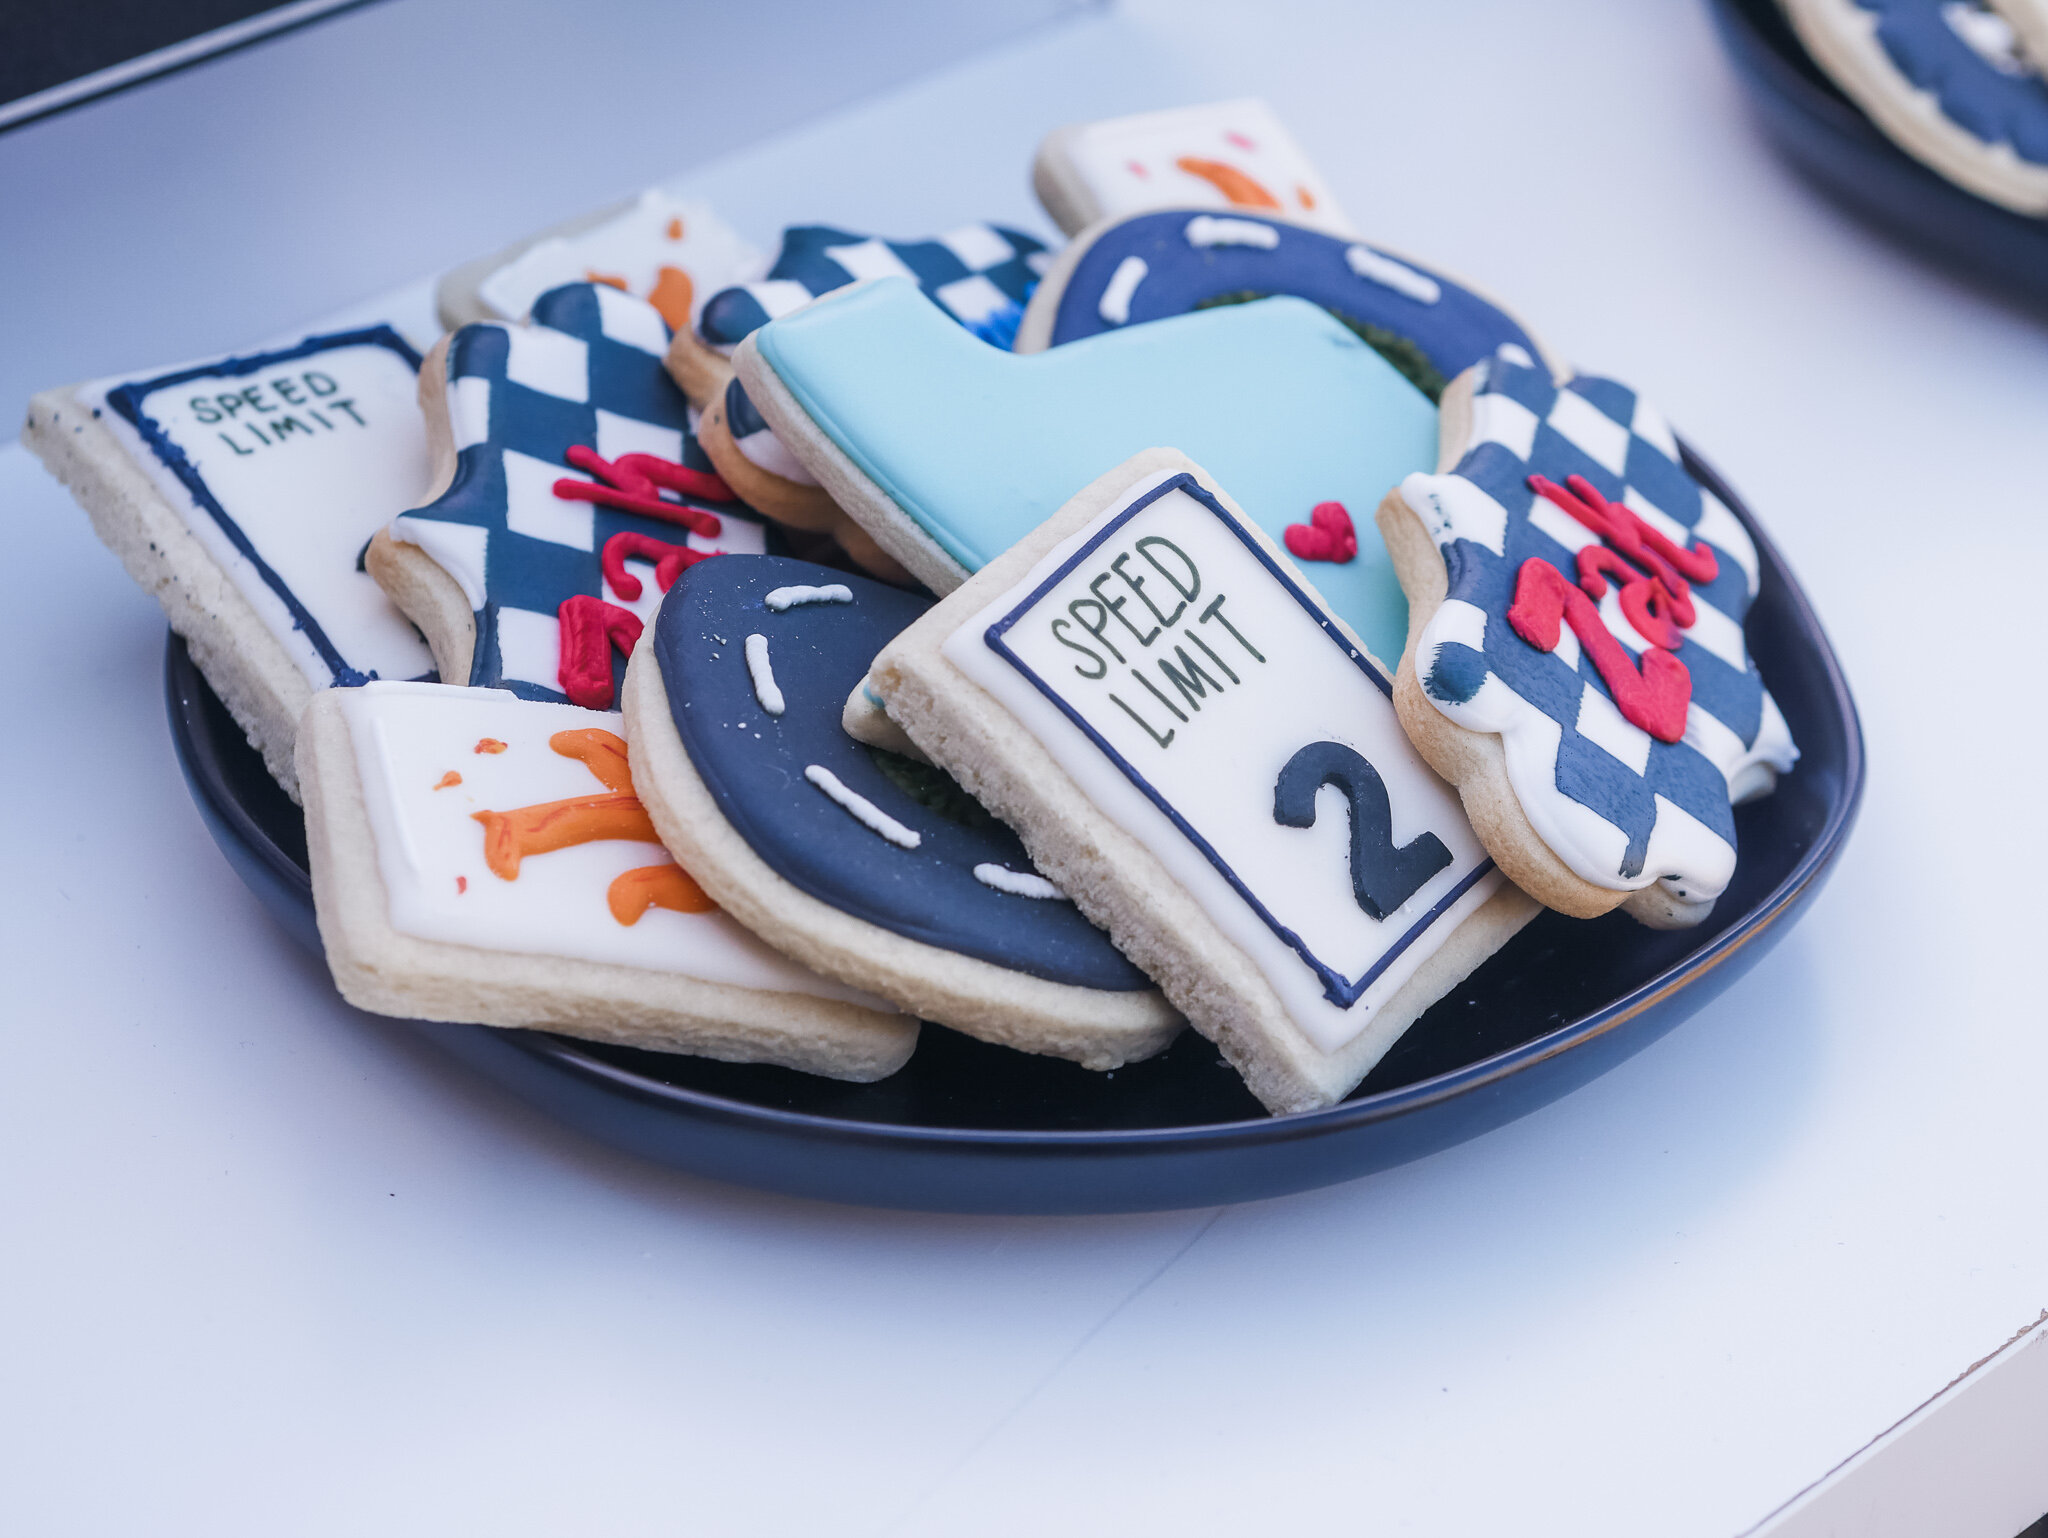  Race Car Birthday Party Cookies - see all the best race car themed birthday party ideas on Mint Event Design www.minteventdesign.com 